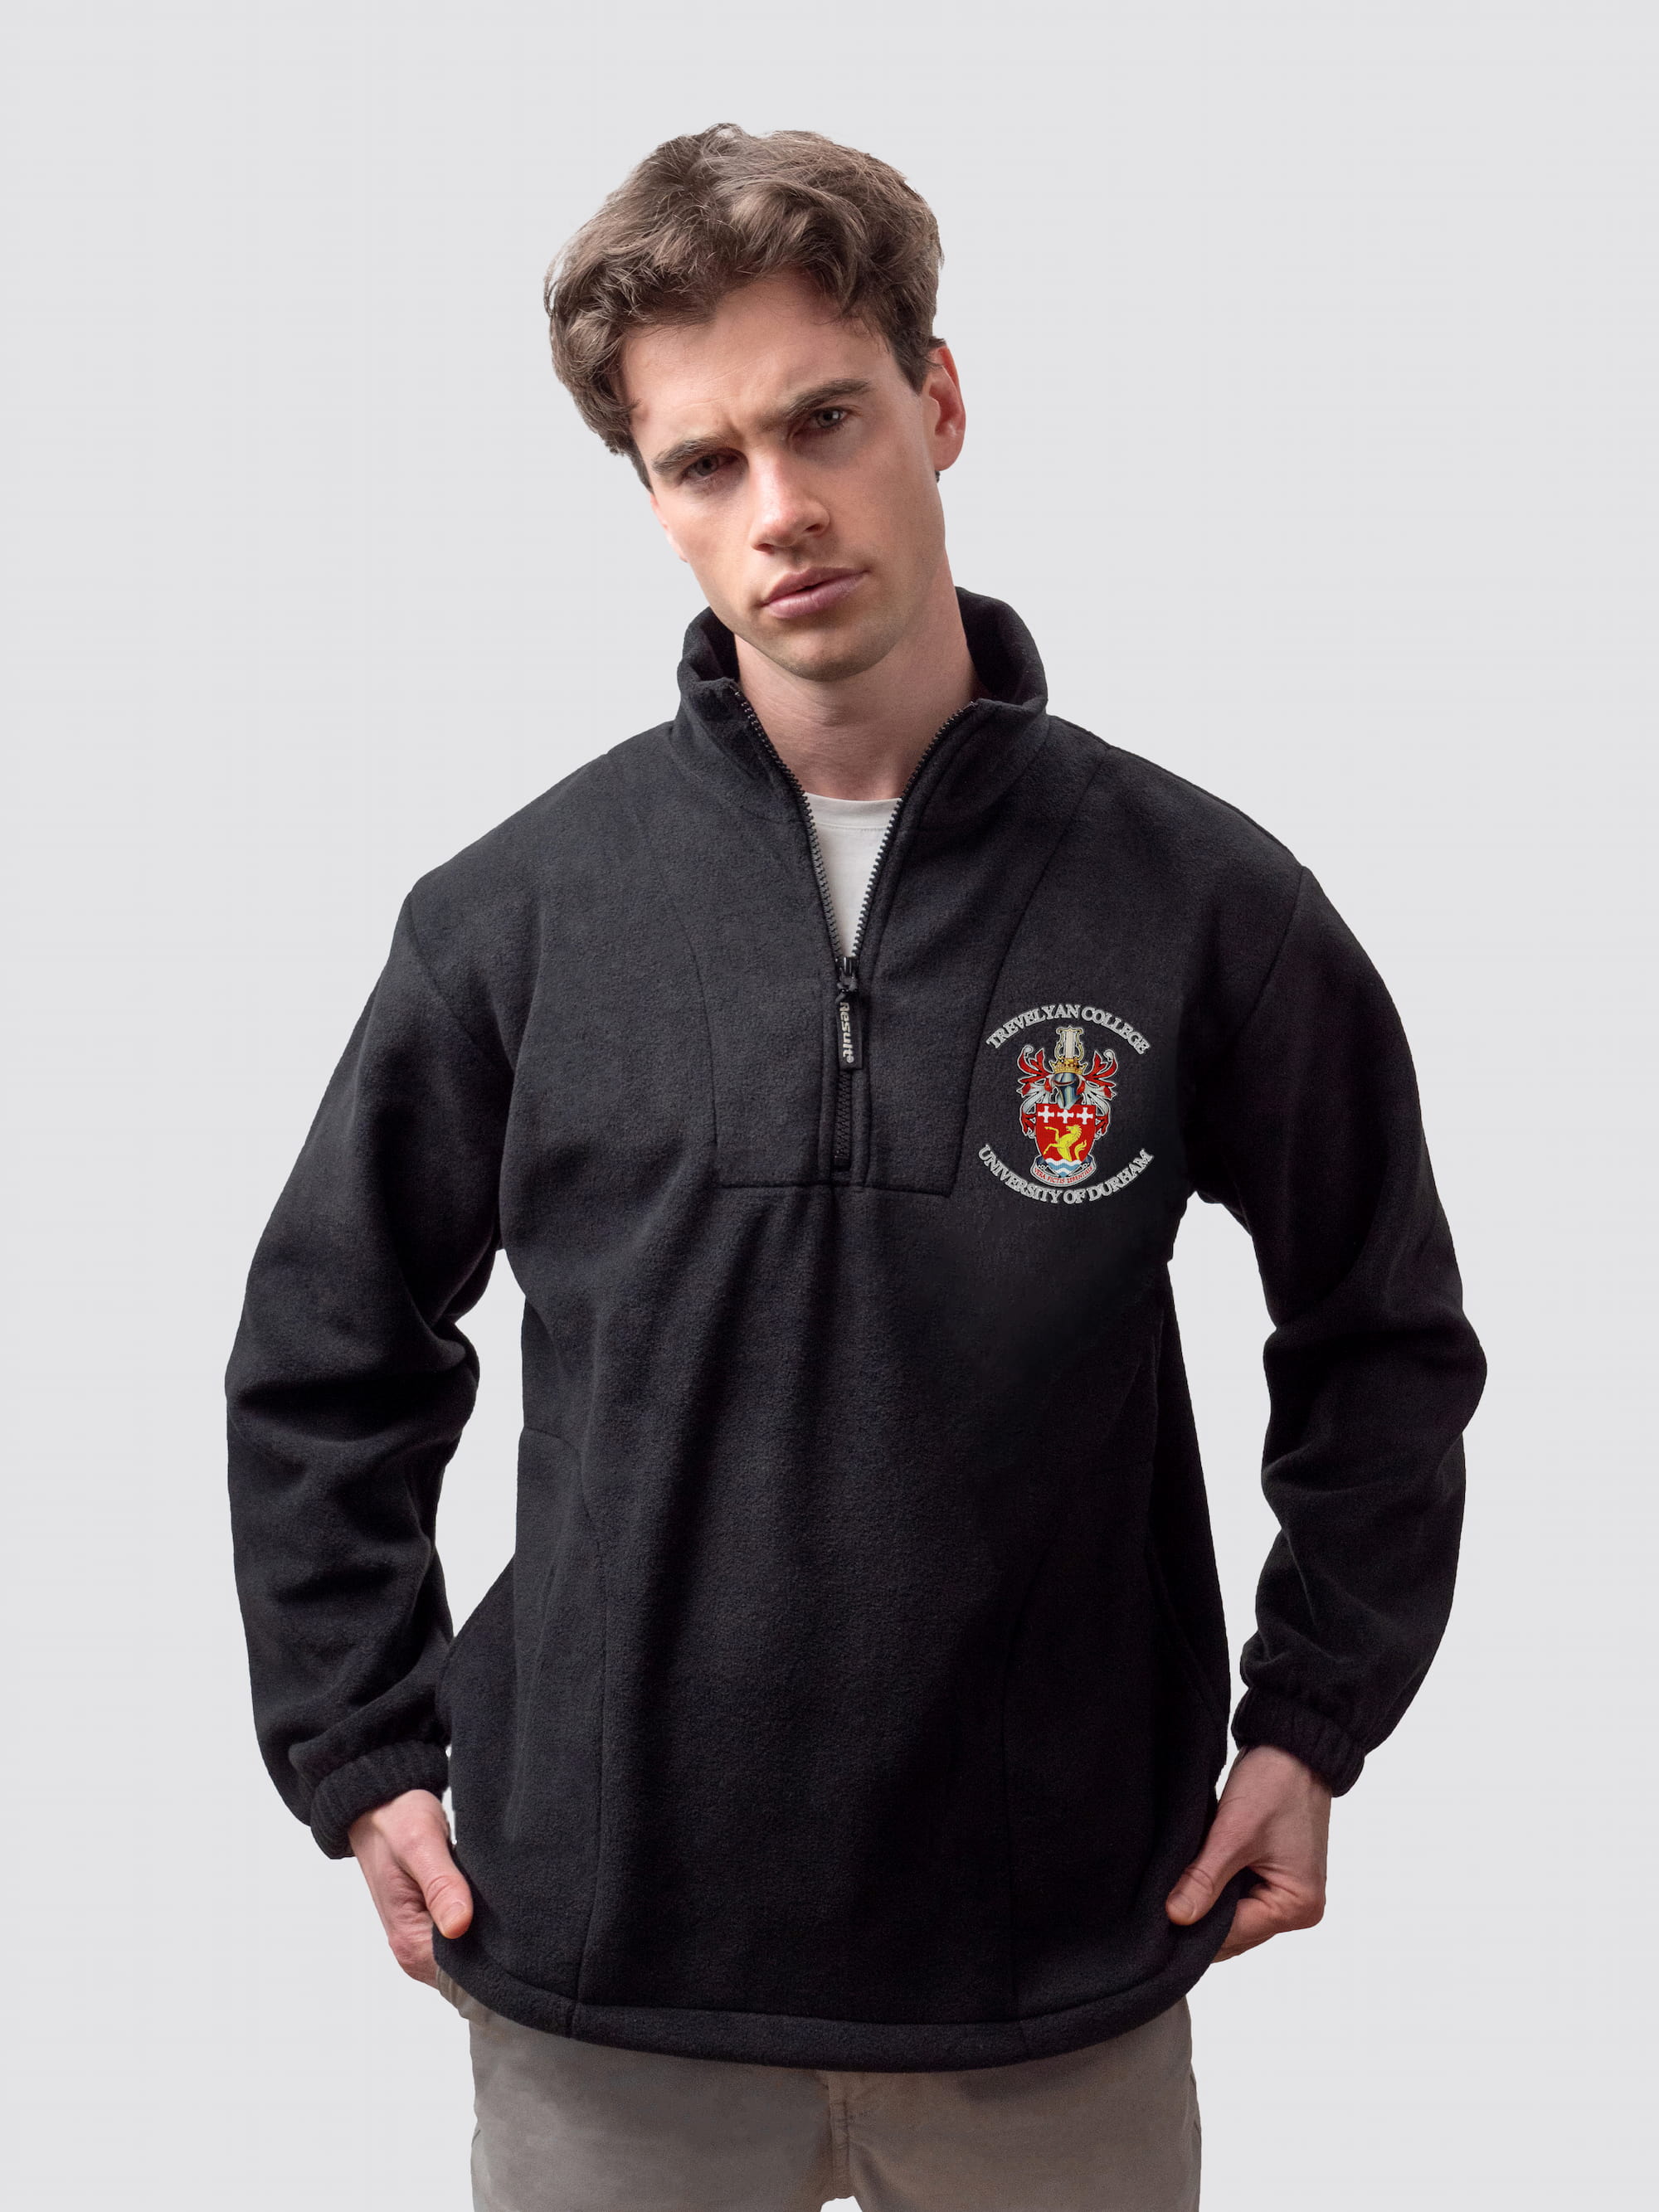 Durham University fleece, with custom embroidered initials and Trevelyan crest